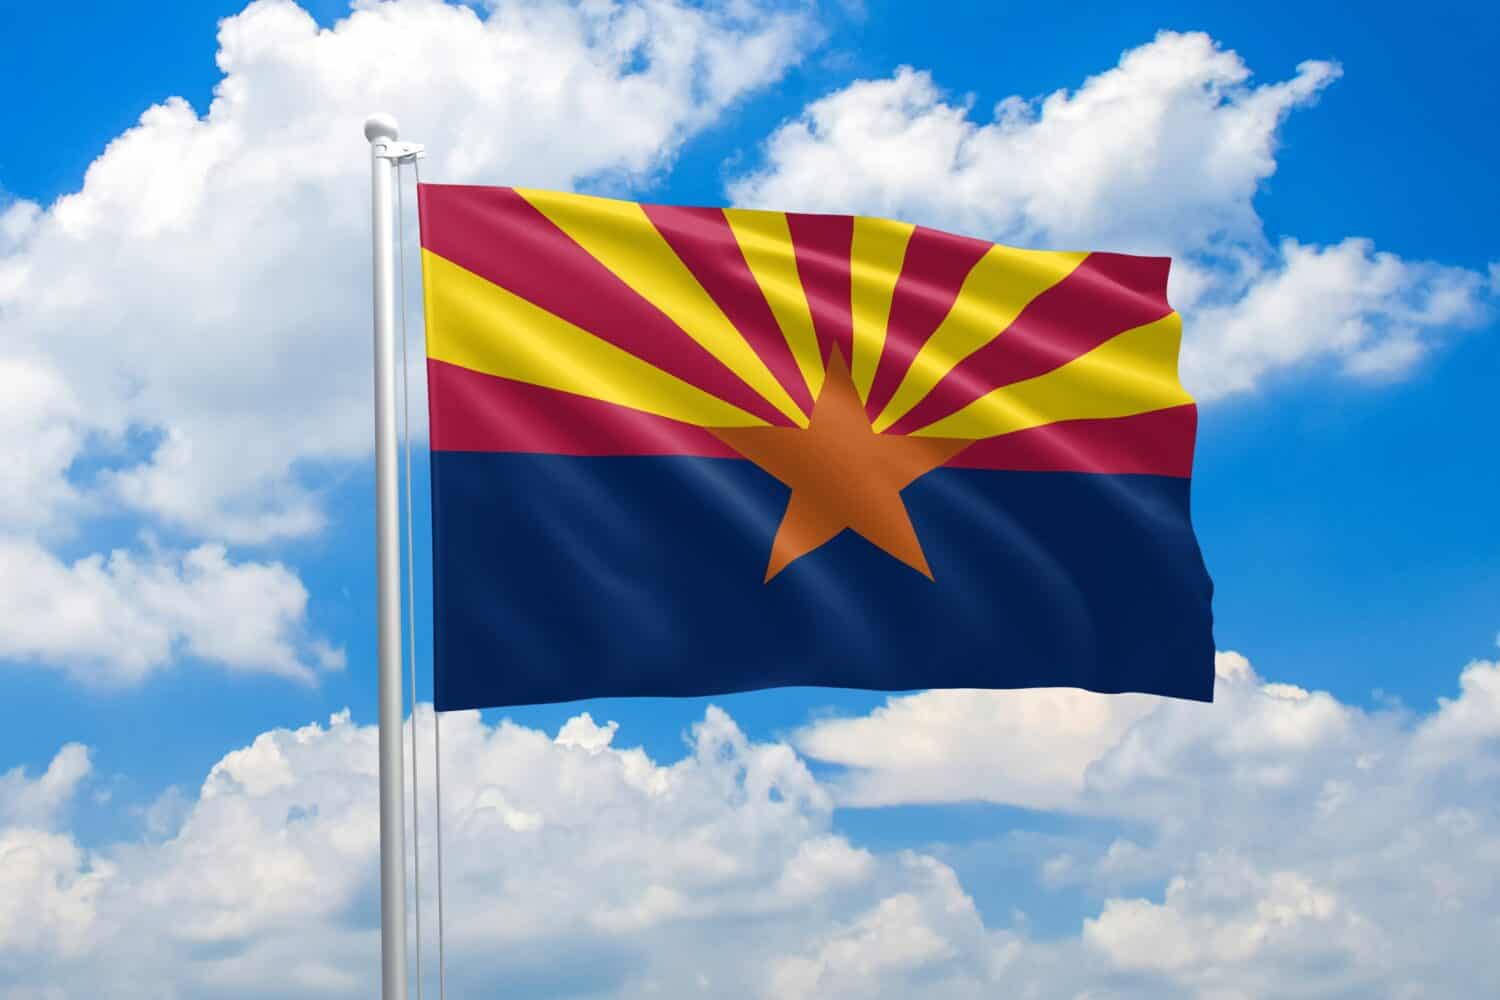 Arizona flag waving in the wind on clouds sky. High quality fabric. International relations concept